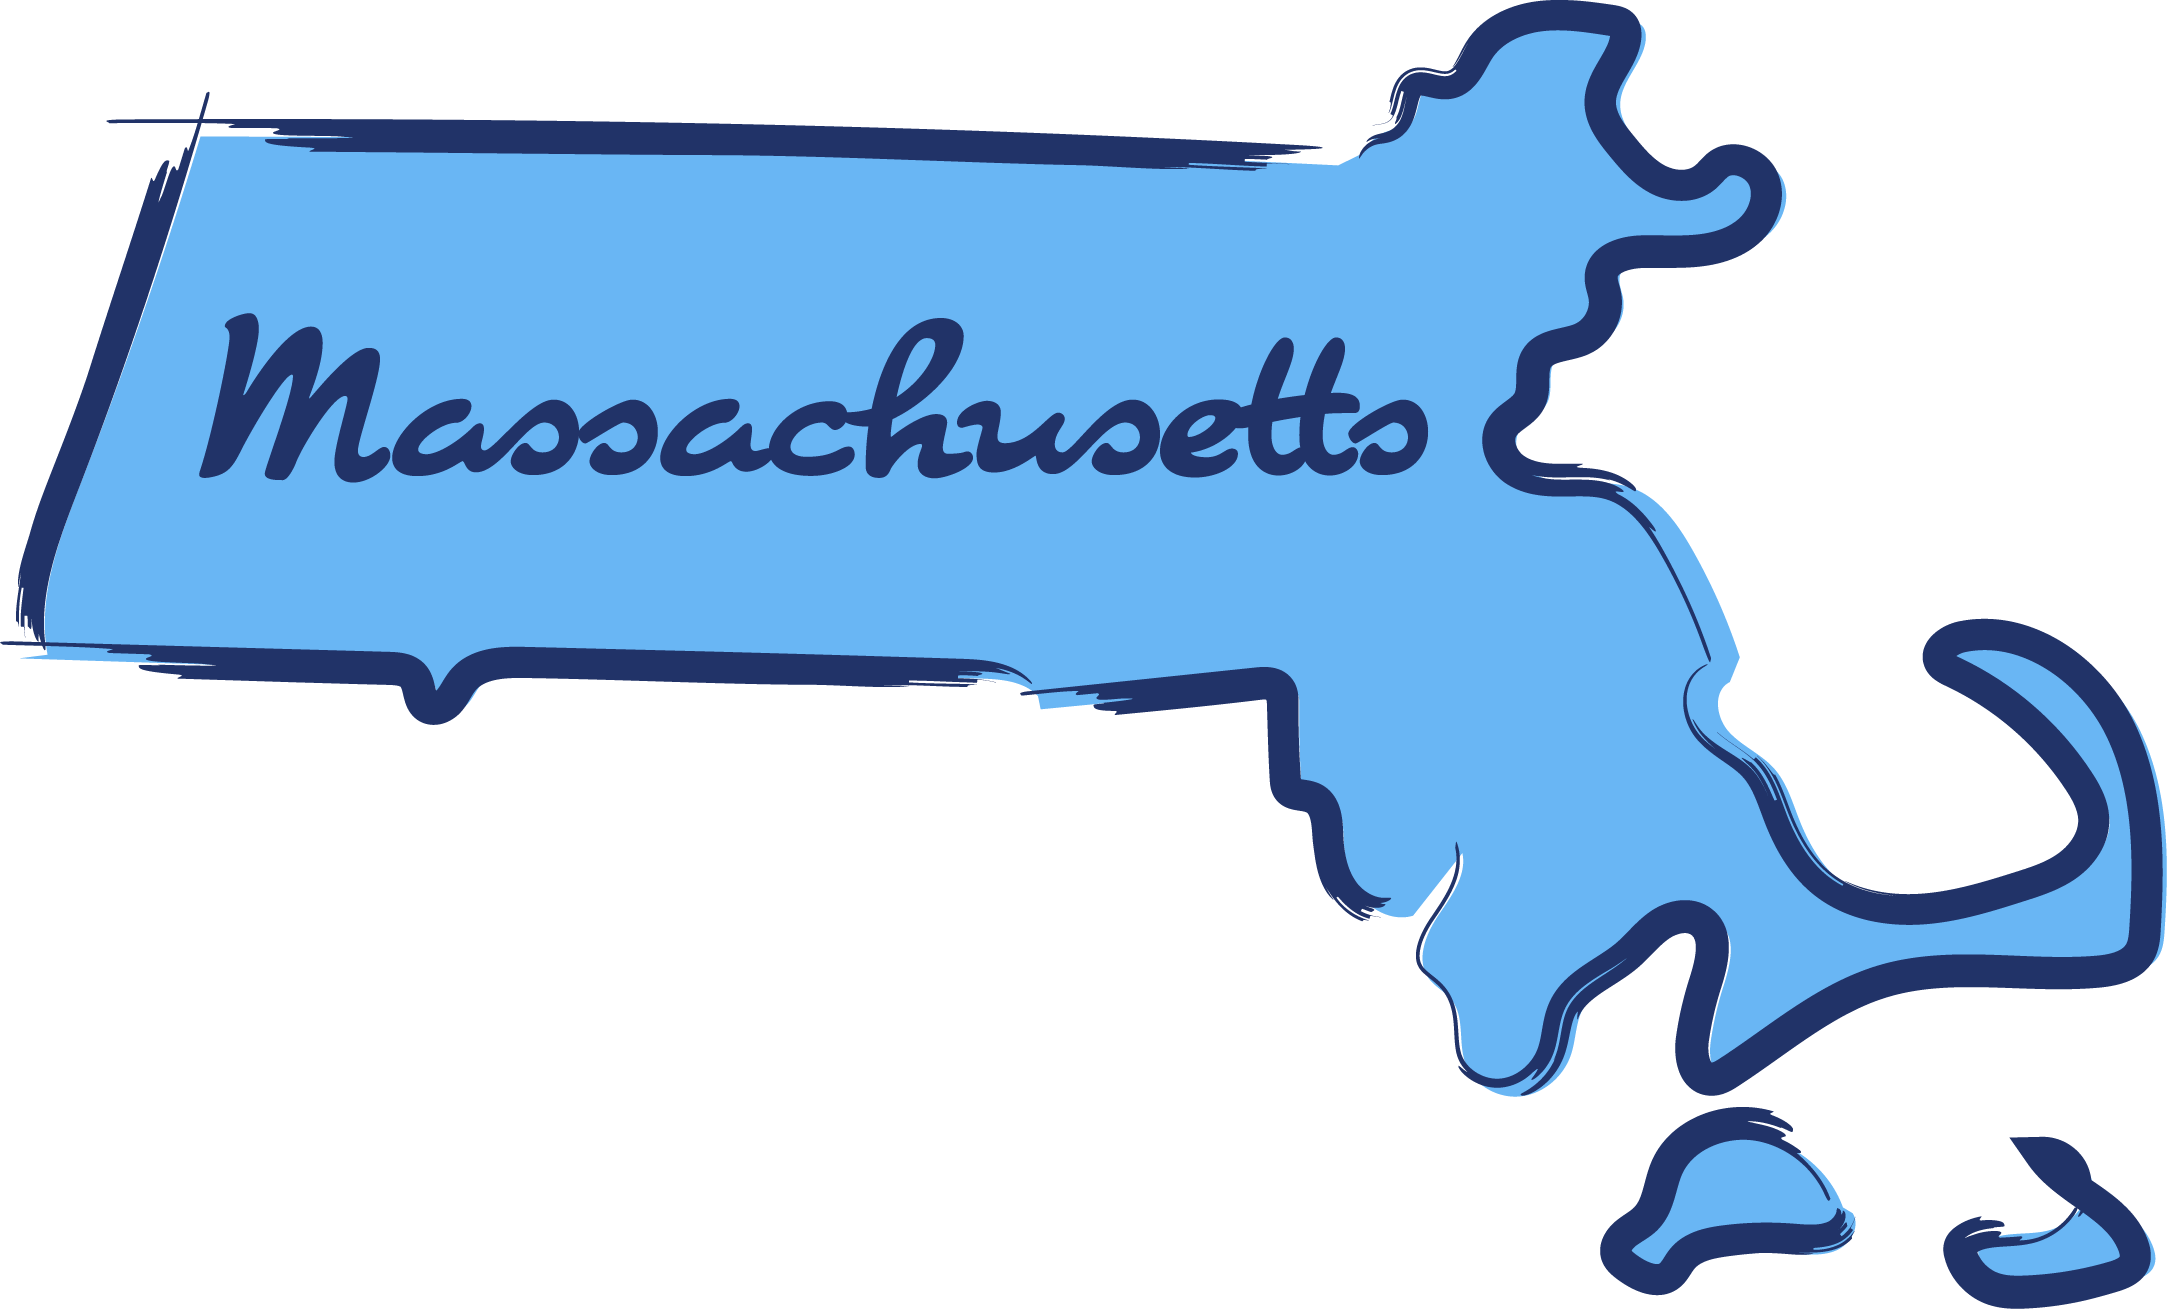 Massachusetts graphic with script font